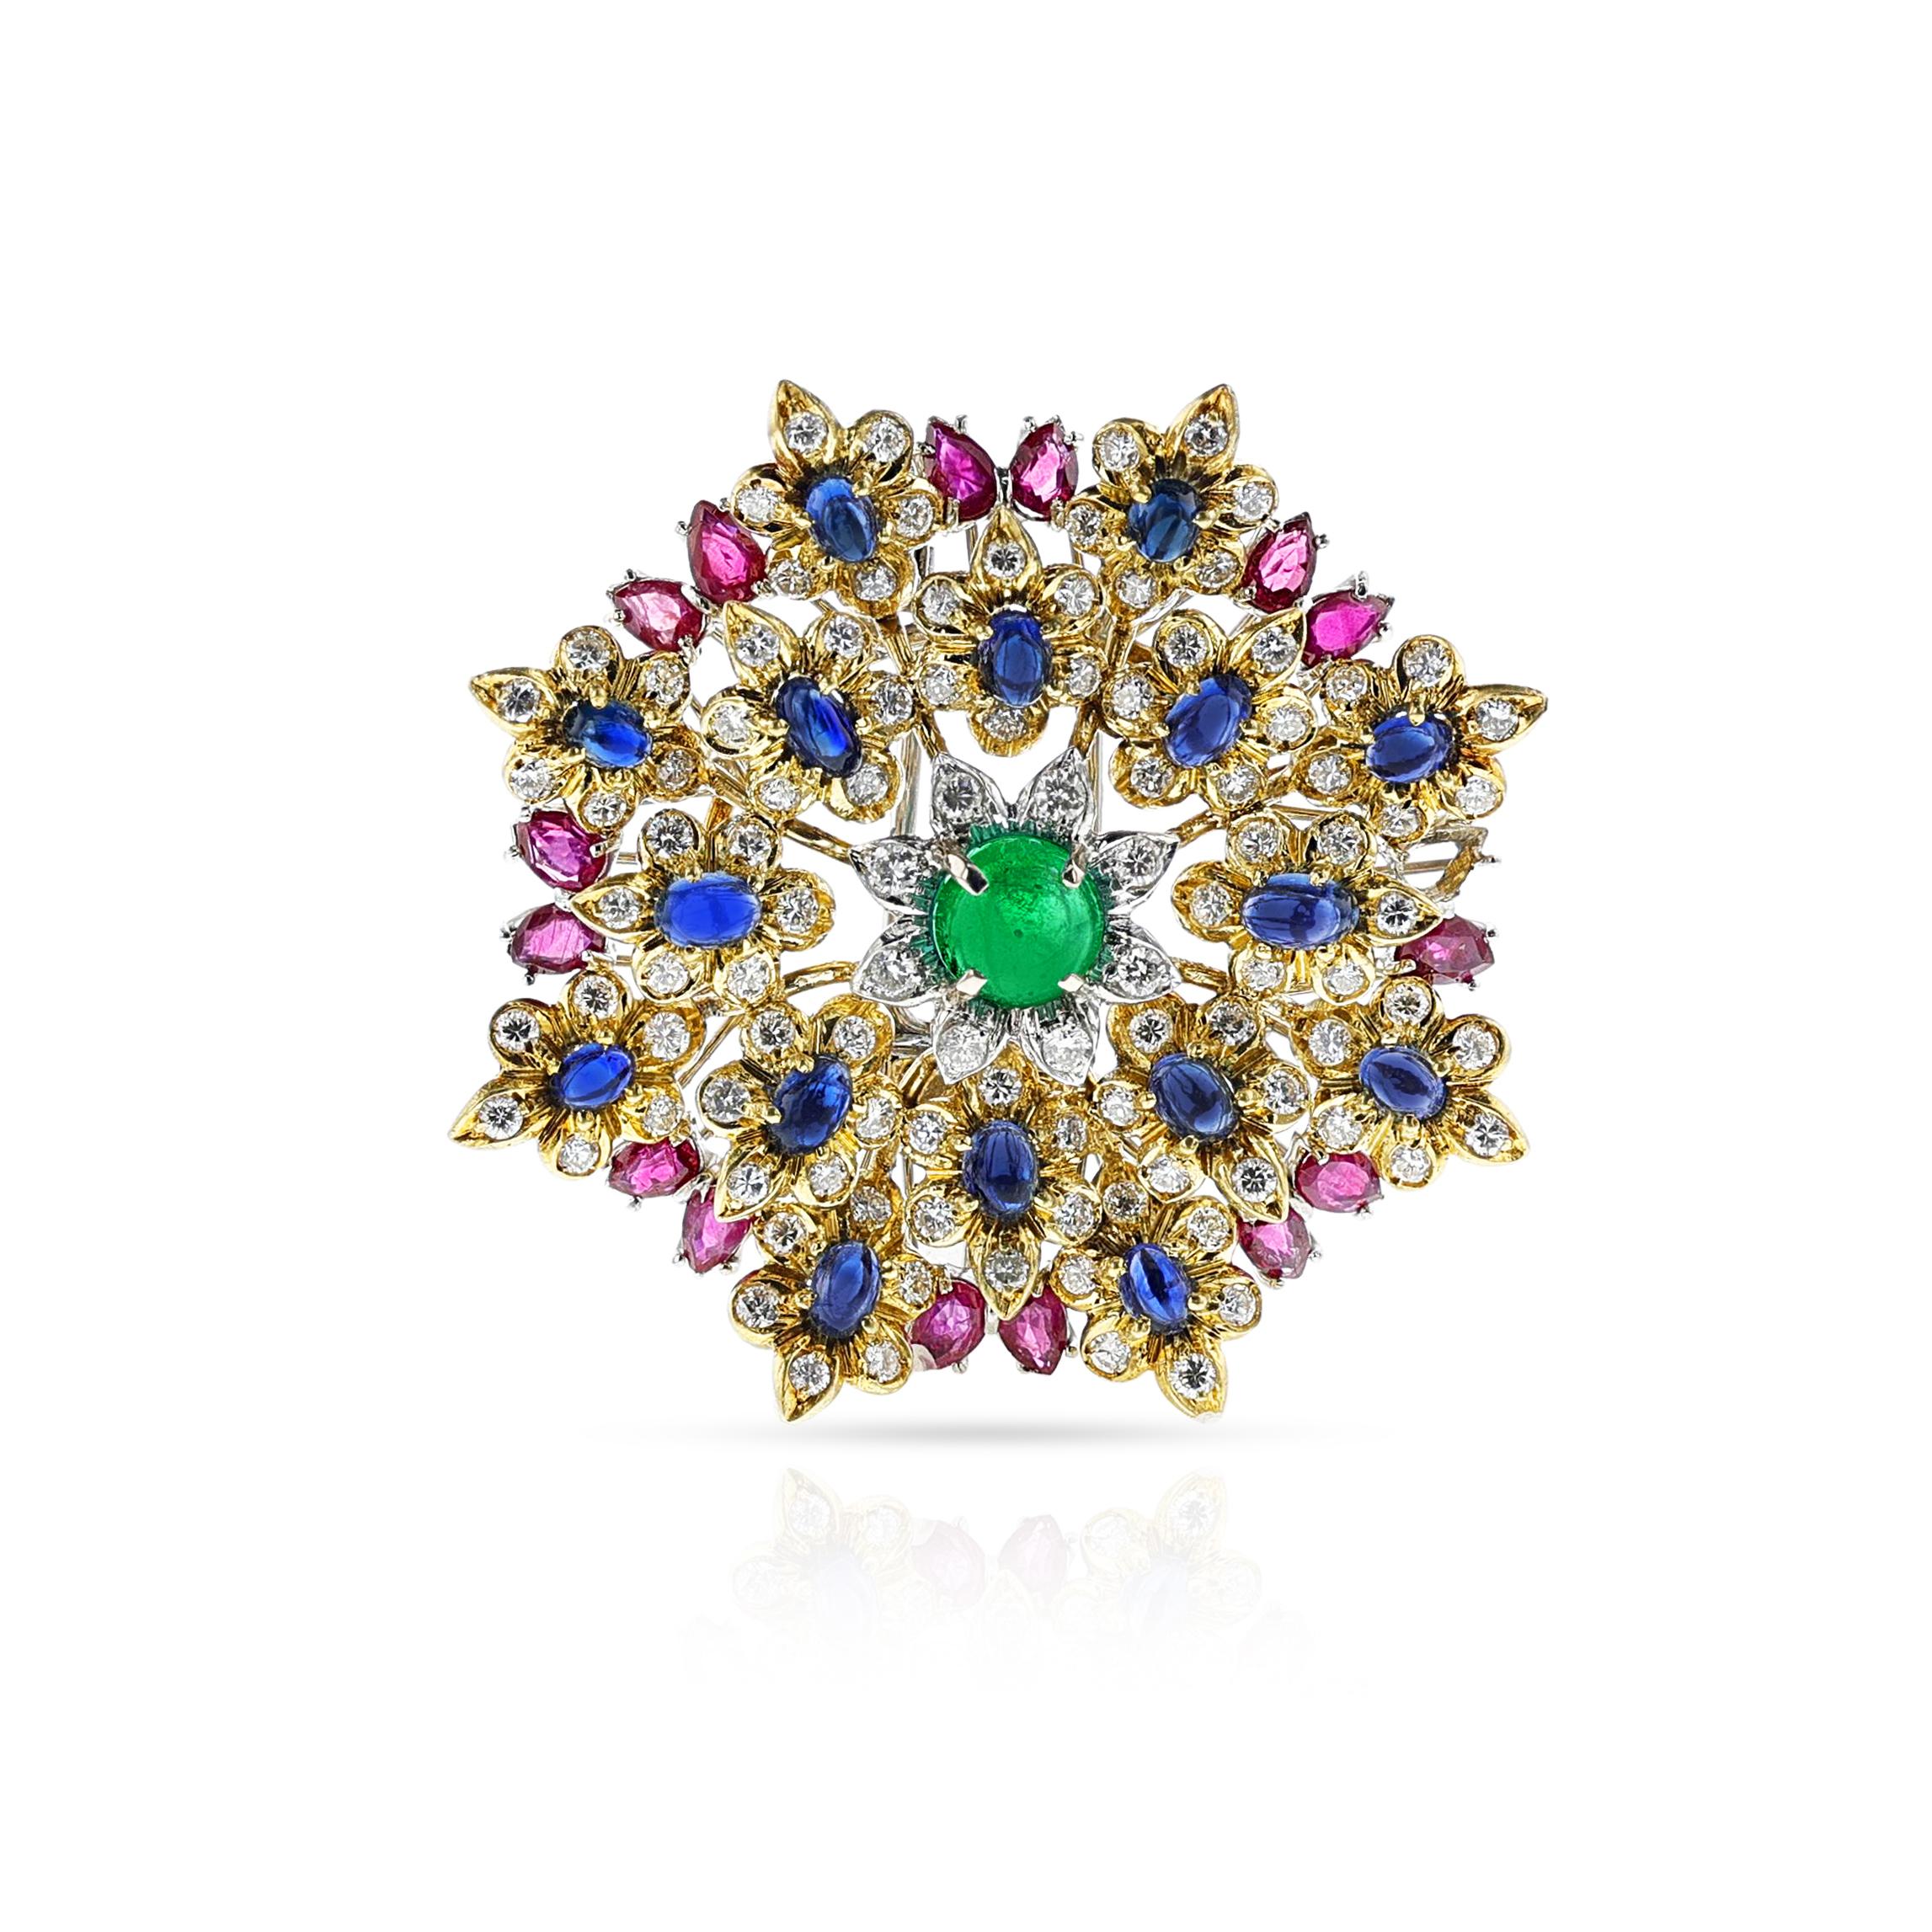 An Emerald, Ruby, Sapphire and Diamond Brooch made in 18k Gold and Platinum. The diamonds weigh 2.50 carats appx. The brooch weighs 21.47 grams. The length is 1.80 inches.



SKU: 1528